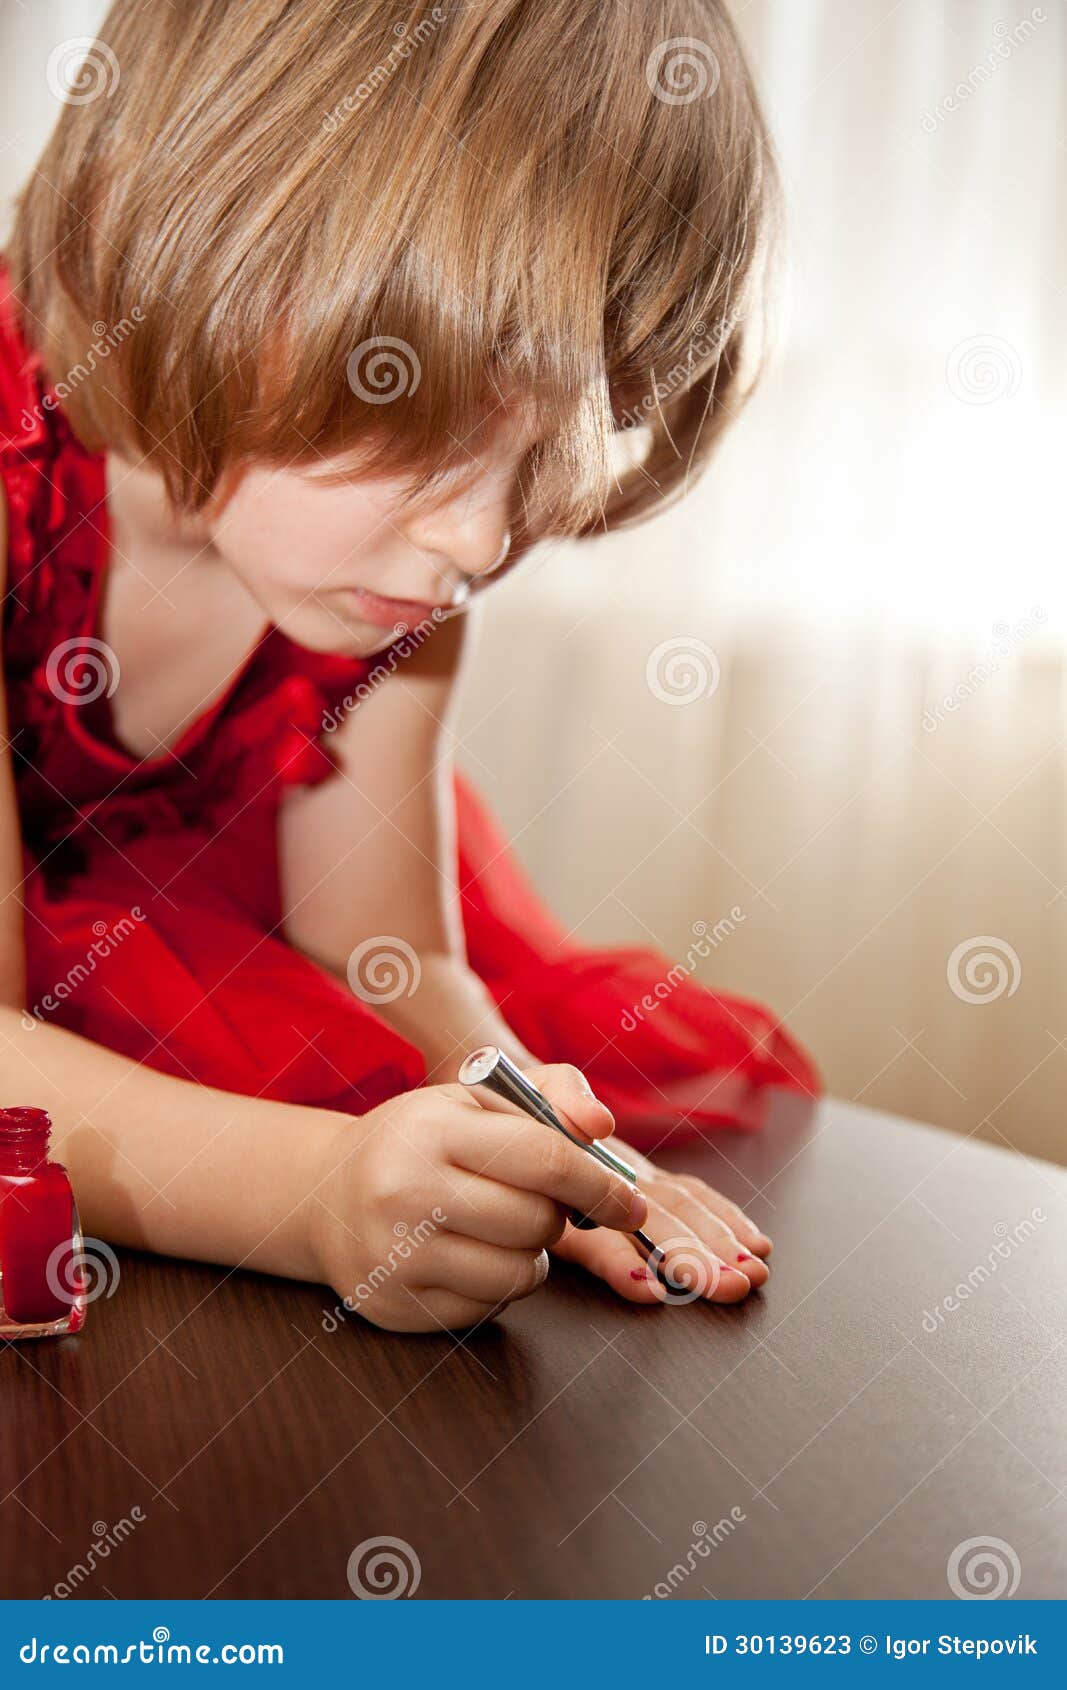 Little Girl in a Red Dress Painted Nails with Nail Polish Stock Image -  Image of enamel, fashion: 30139623